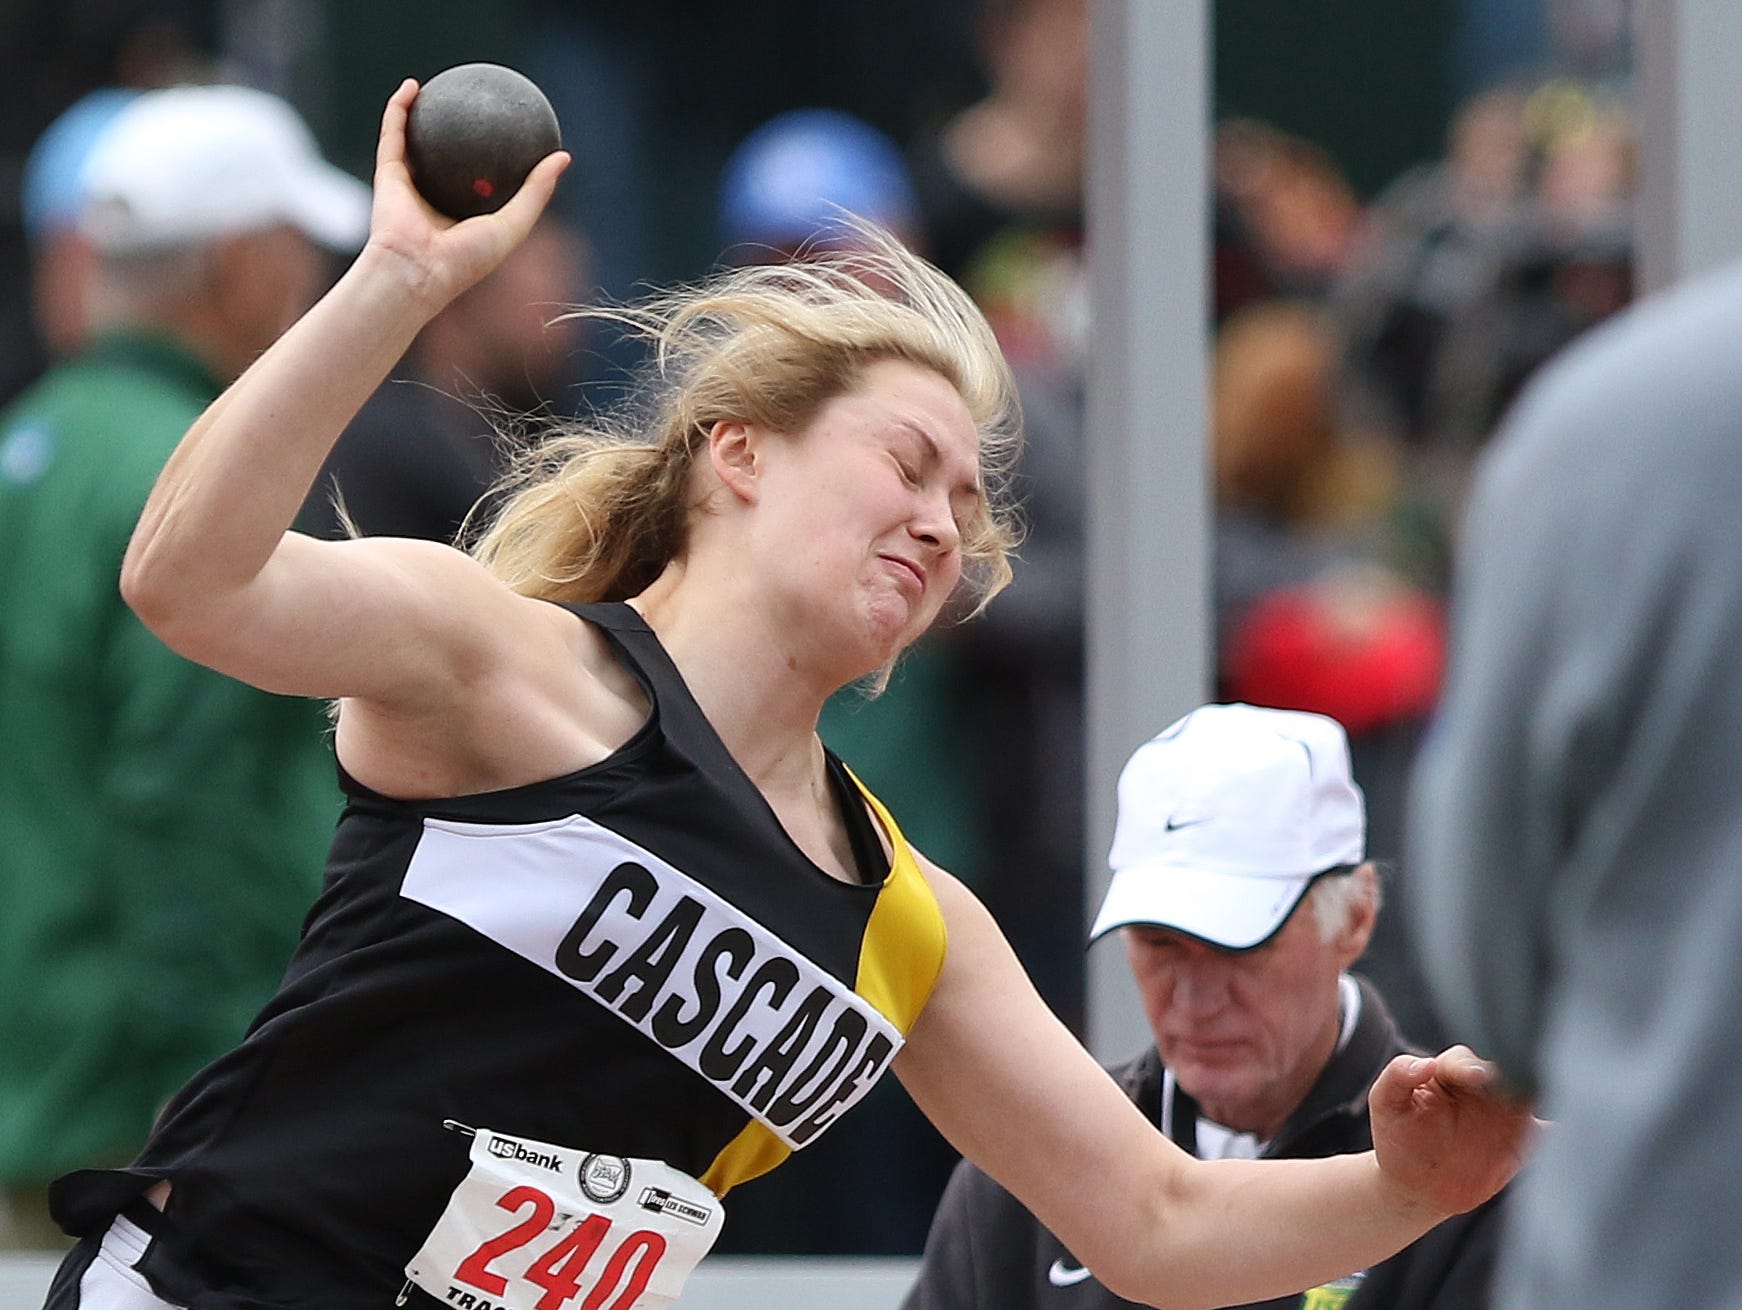 Cascade's Halle Wright competes in the shot put during the final day of the OSAA Track and Field State Championships at Hayward Field in Eugene, Ore.